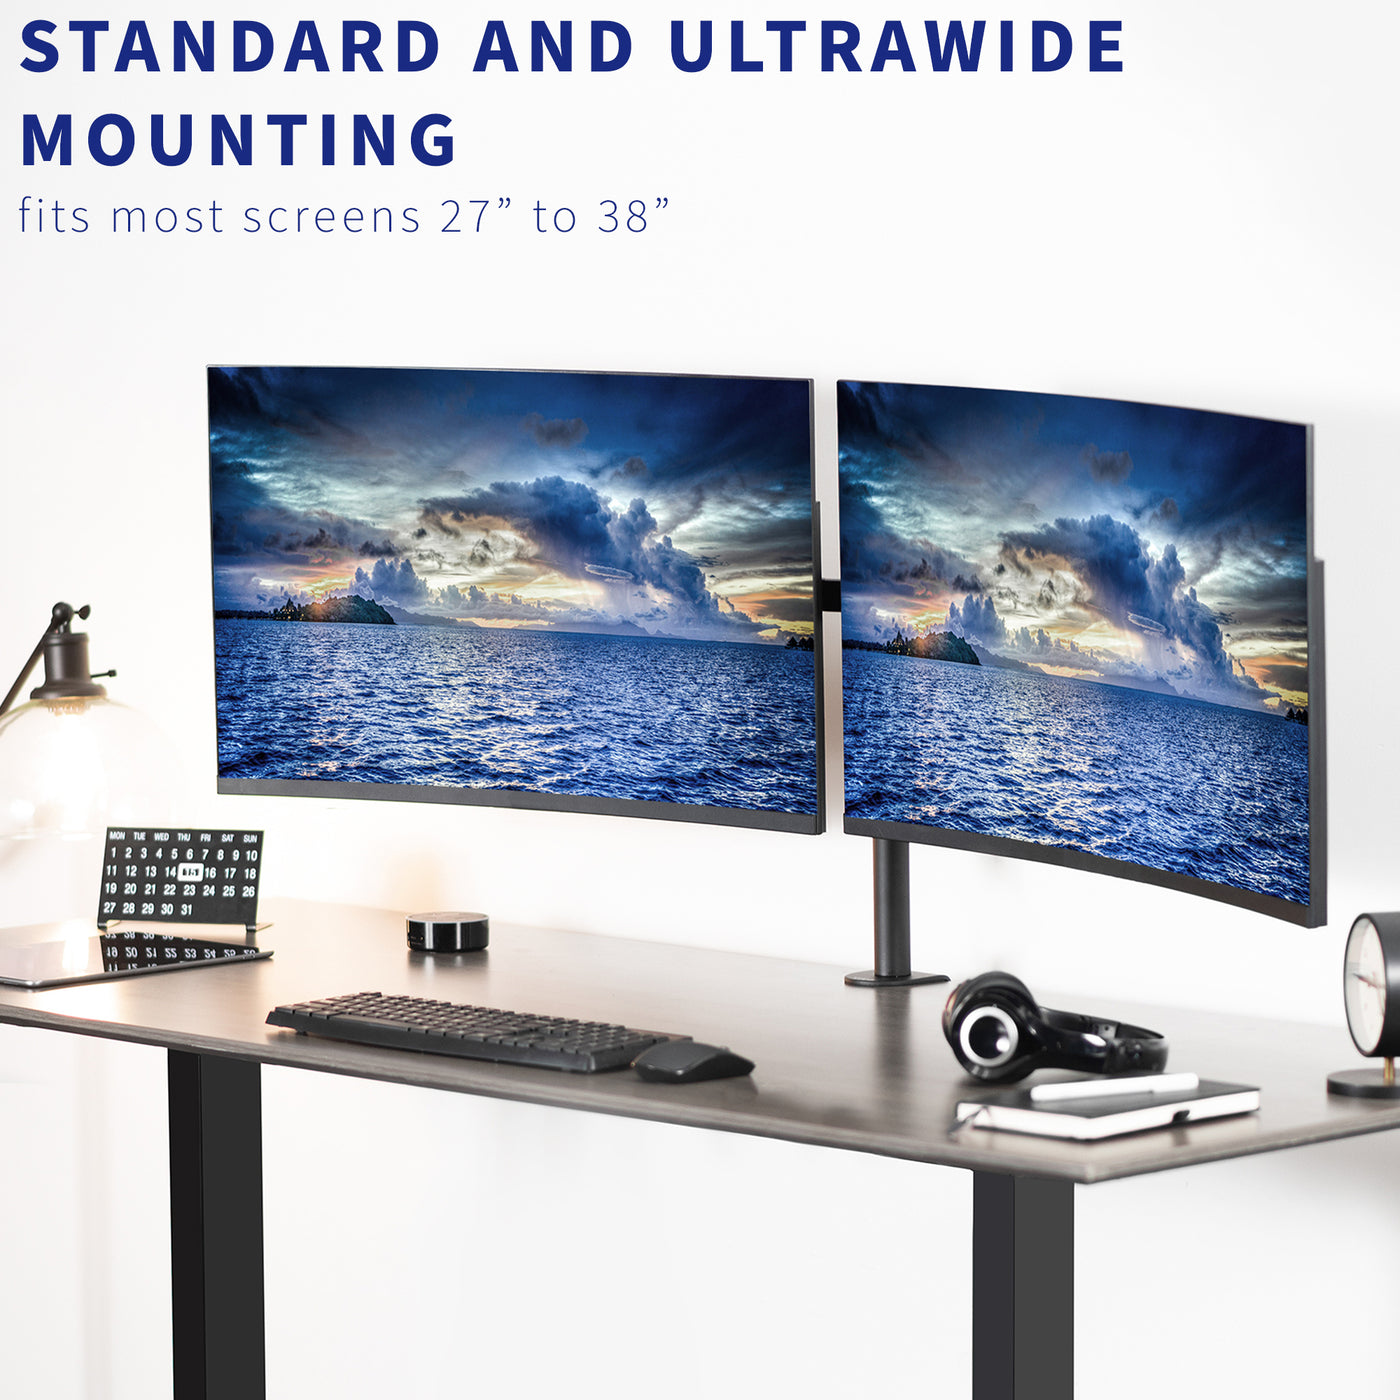 Telescoping Dual Monitor Desk Mount – VIVO desk solutions, screen mounting,  and more